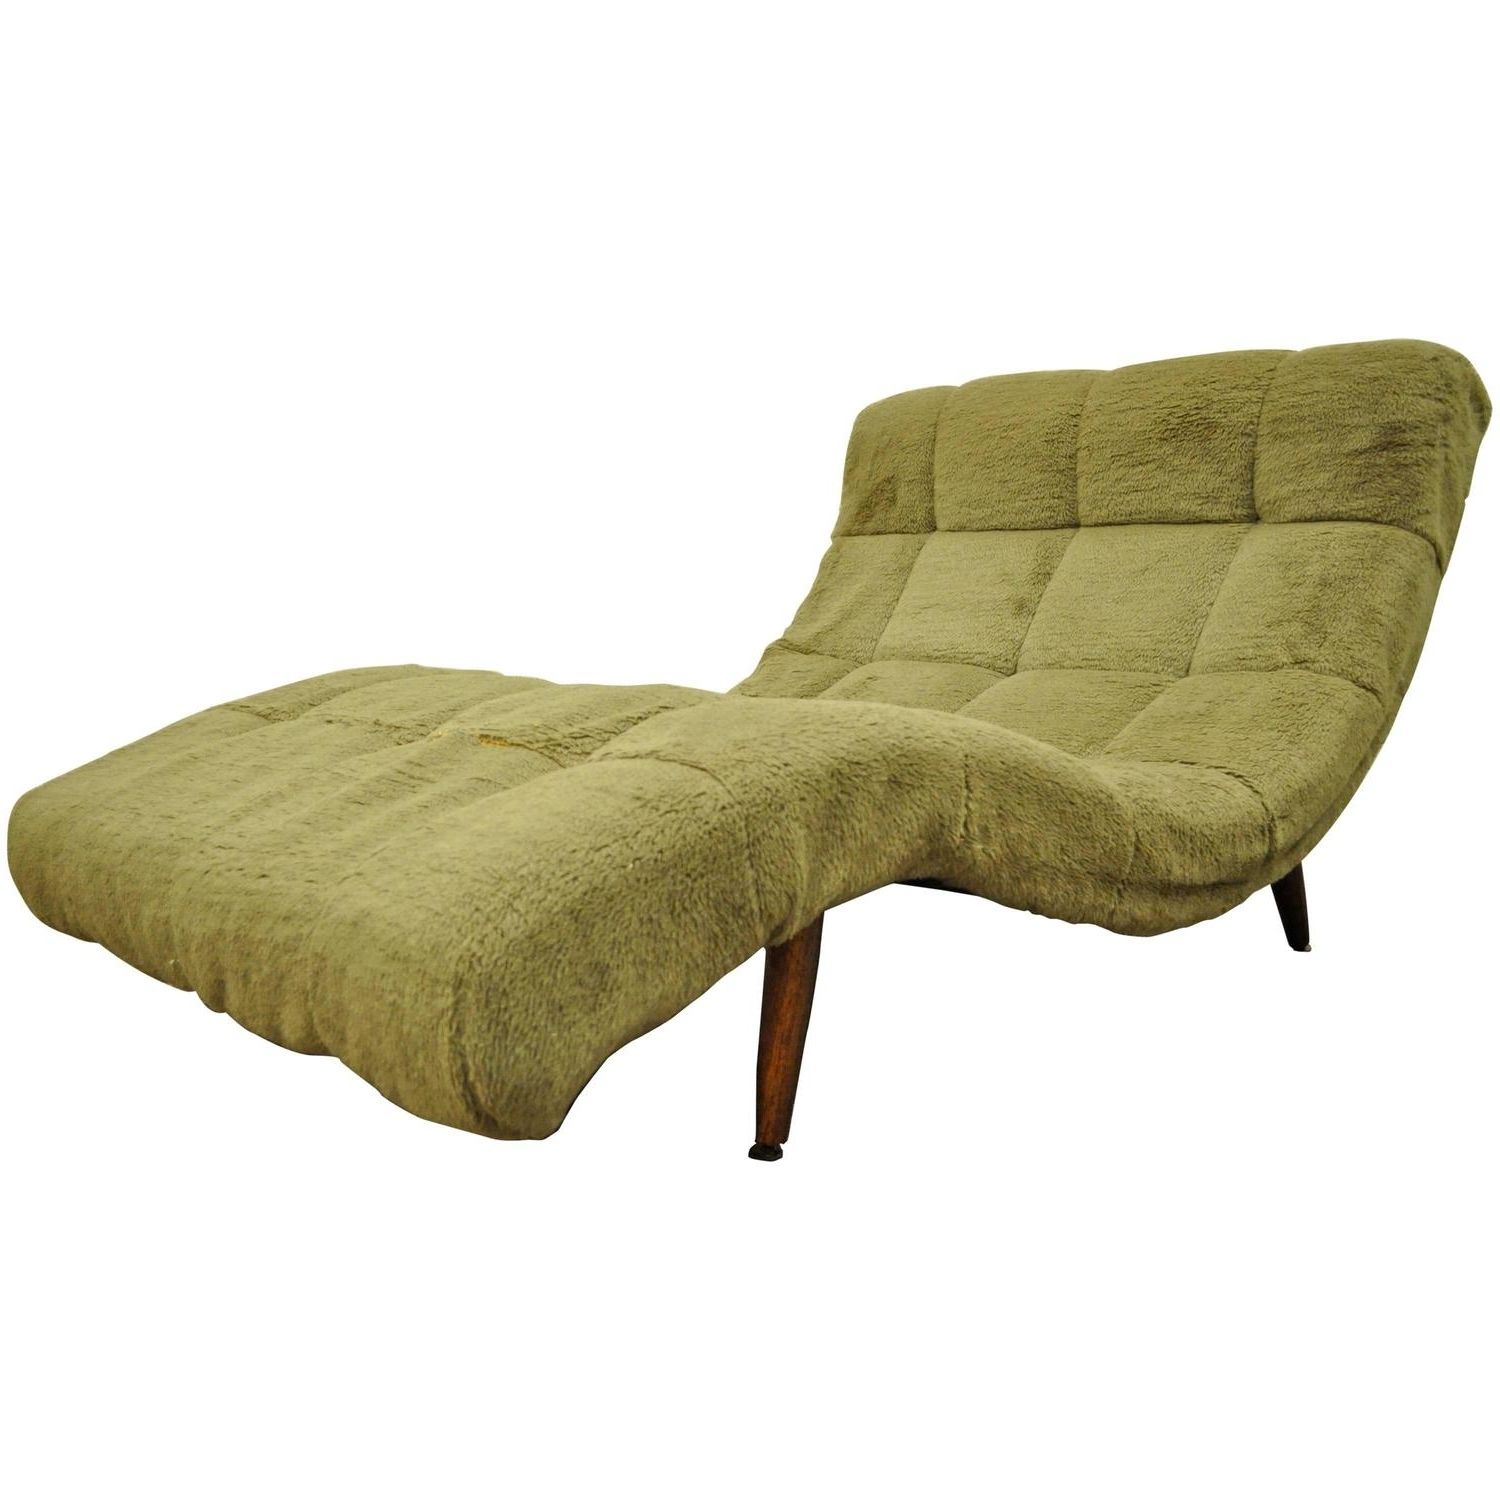 Recent Midcentury Modern Double Wide Wave Chaise Lounge In The Style Of Regarding Wide Chaise Lounges (View 2 of 15)